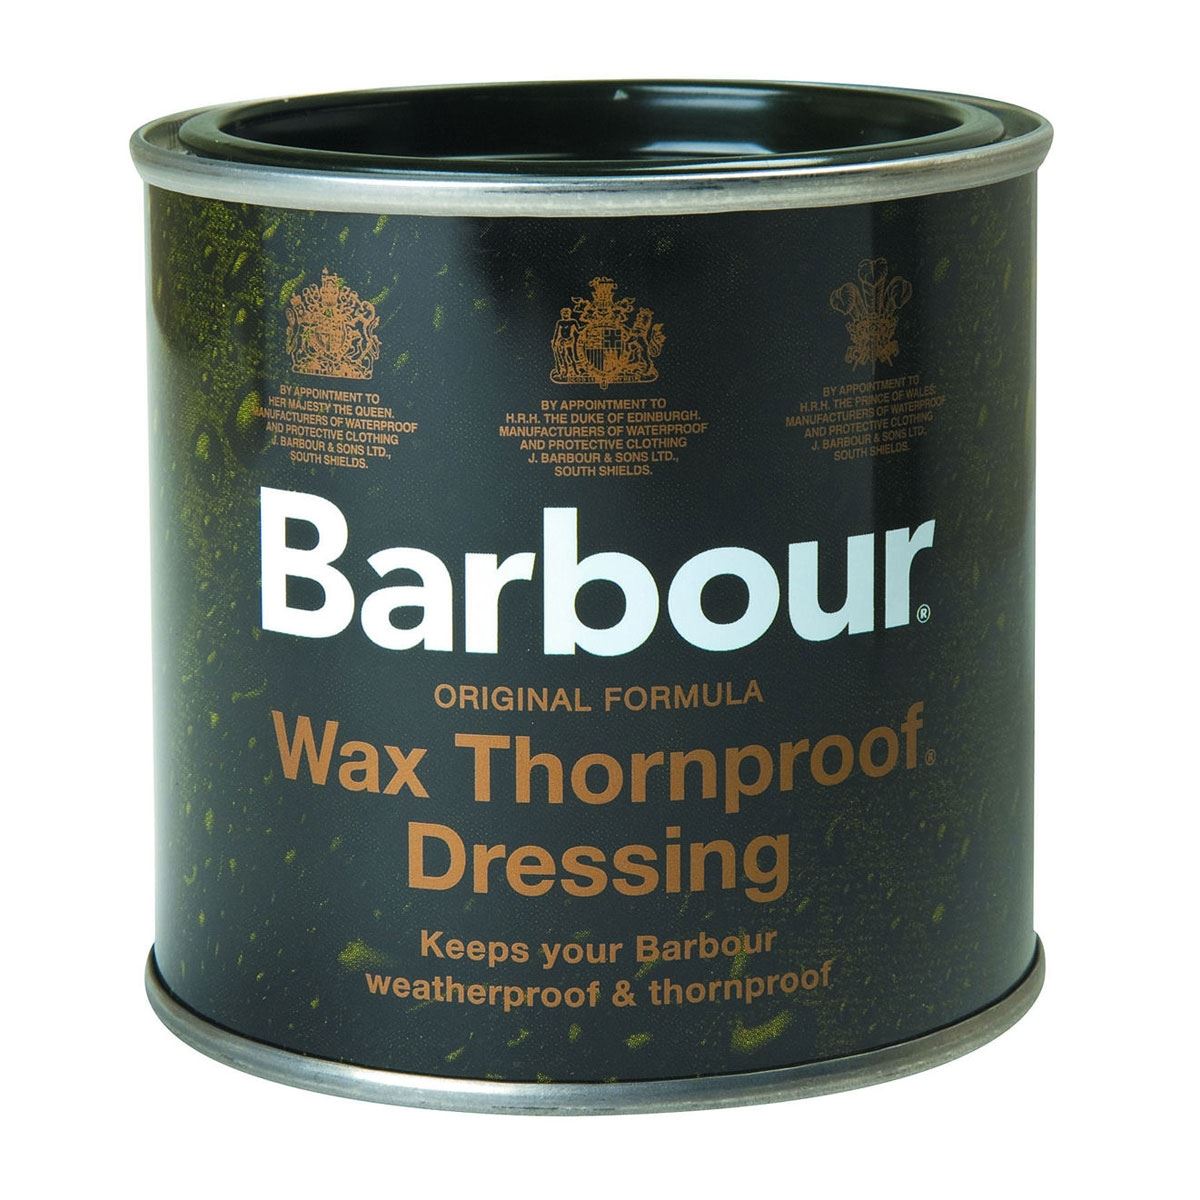 How challenging is re-waxing a Barbour jacket with Barbour wax?